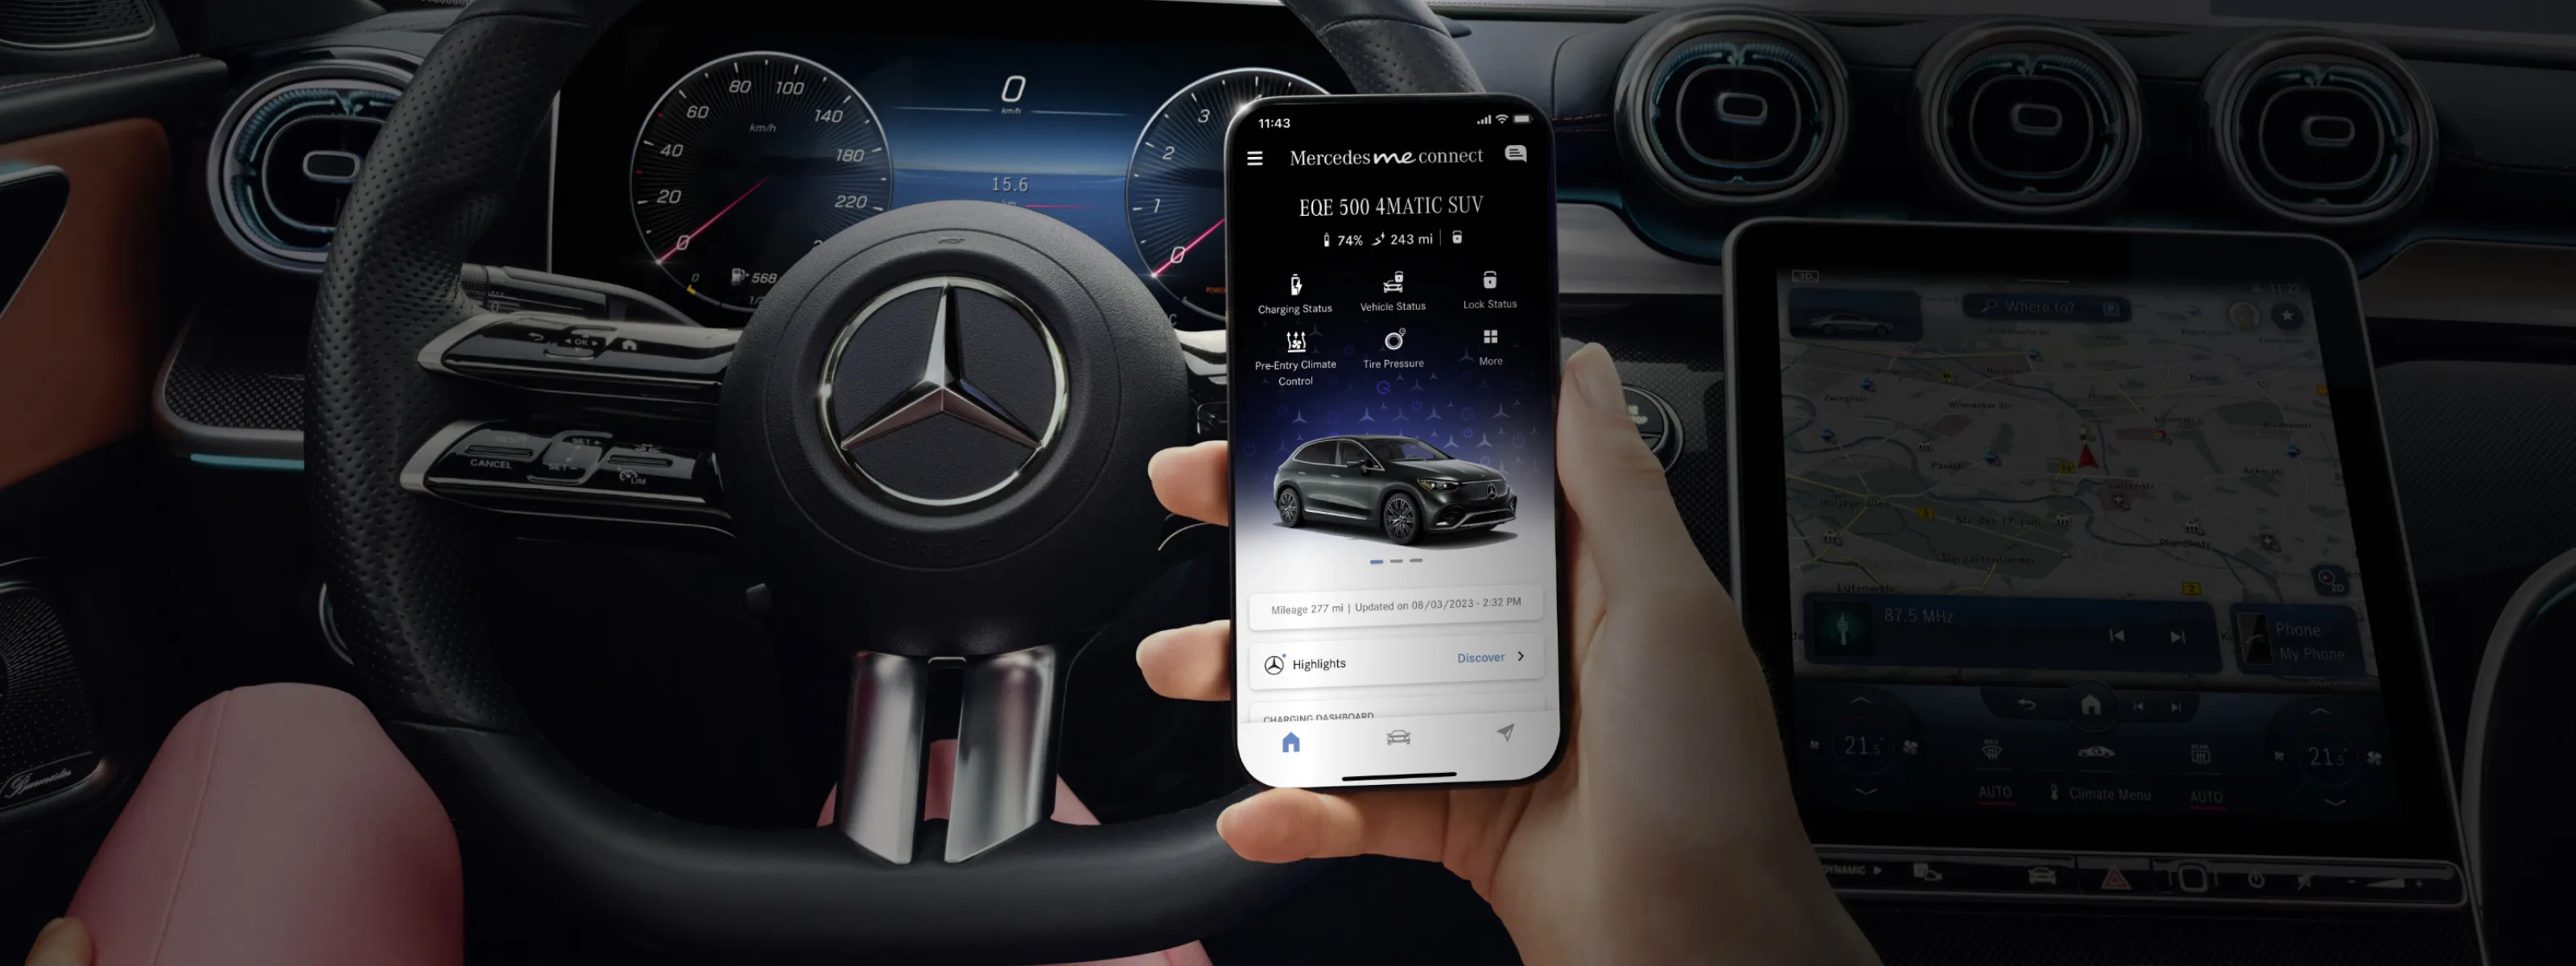 Car Wi-Fi: Everything you need to know about connected vehicles